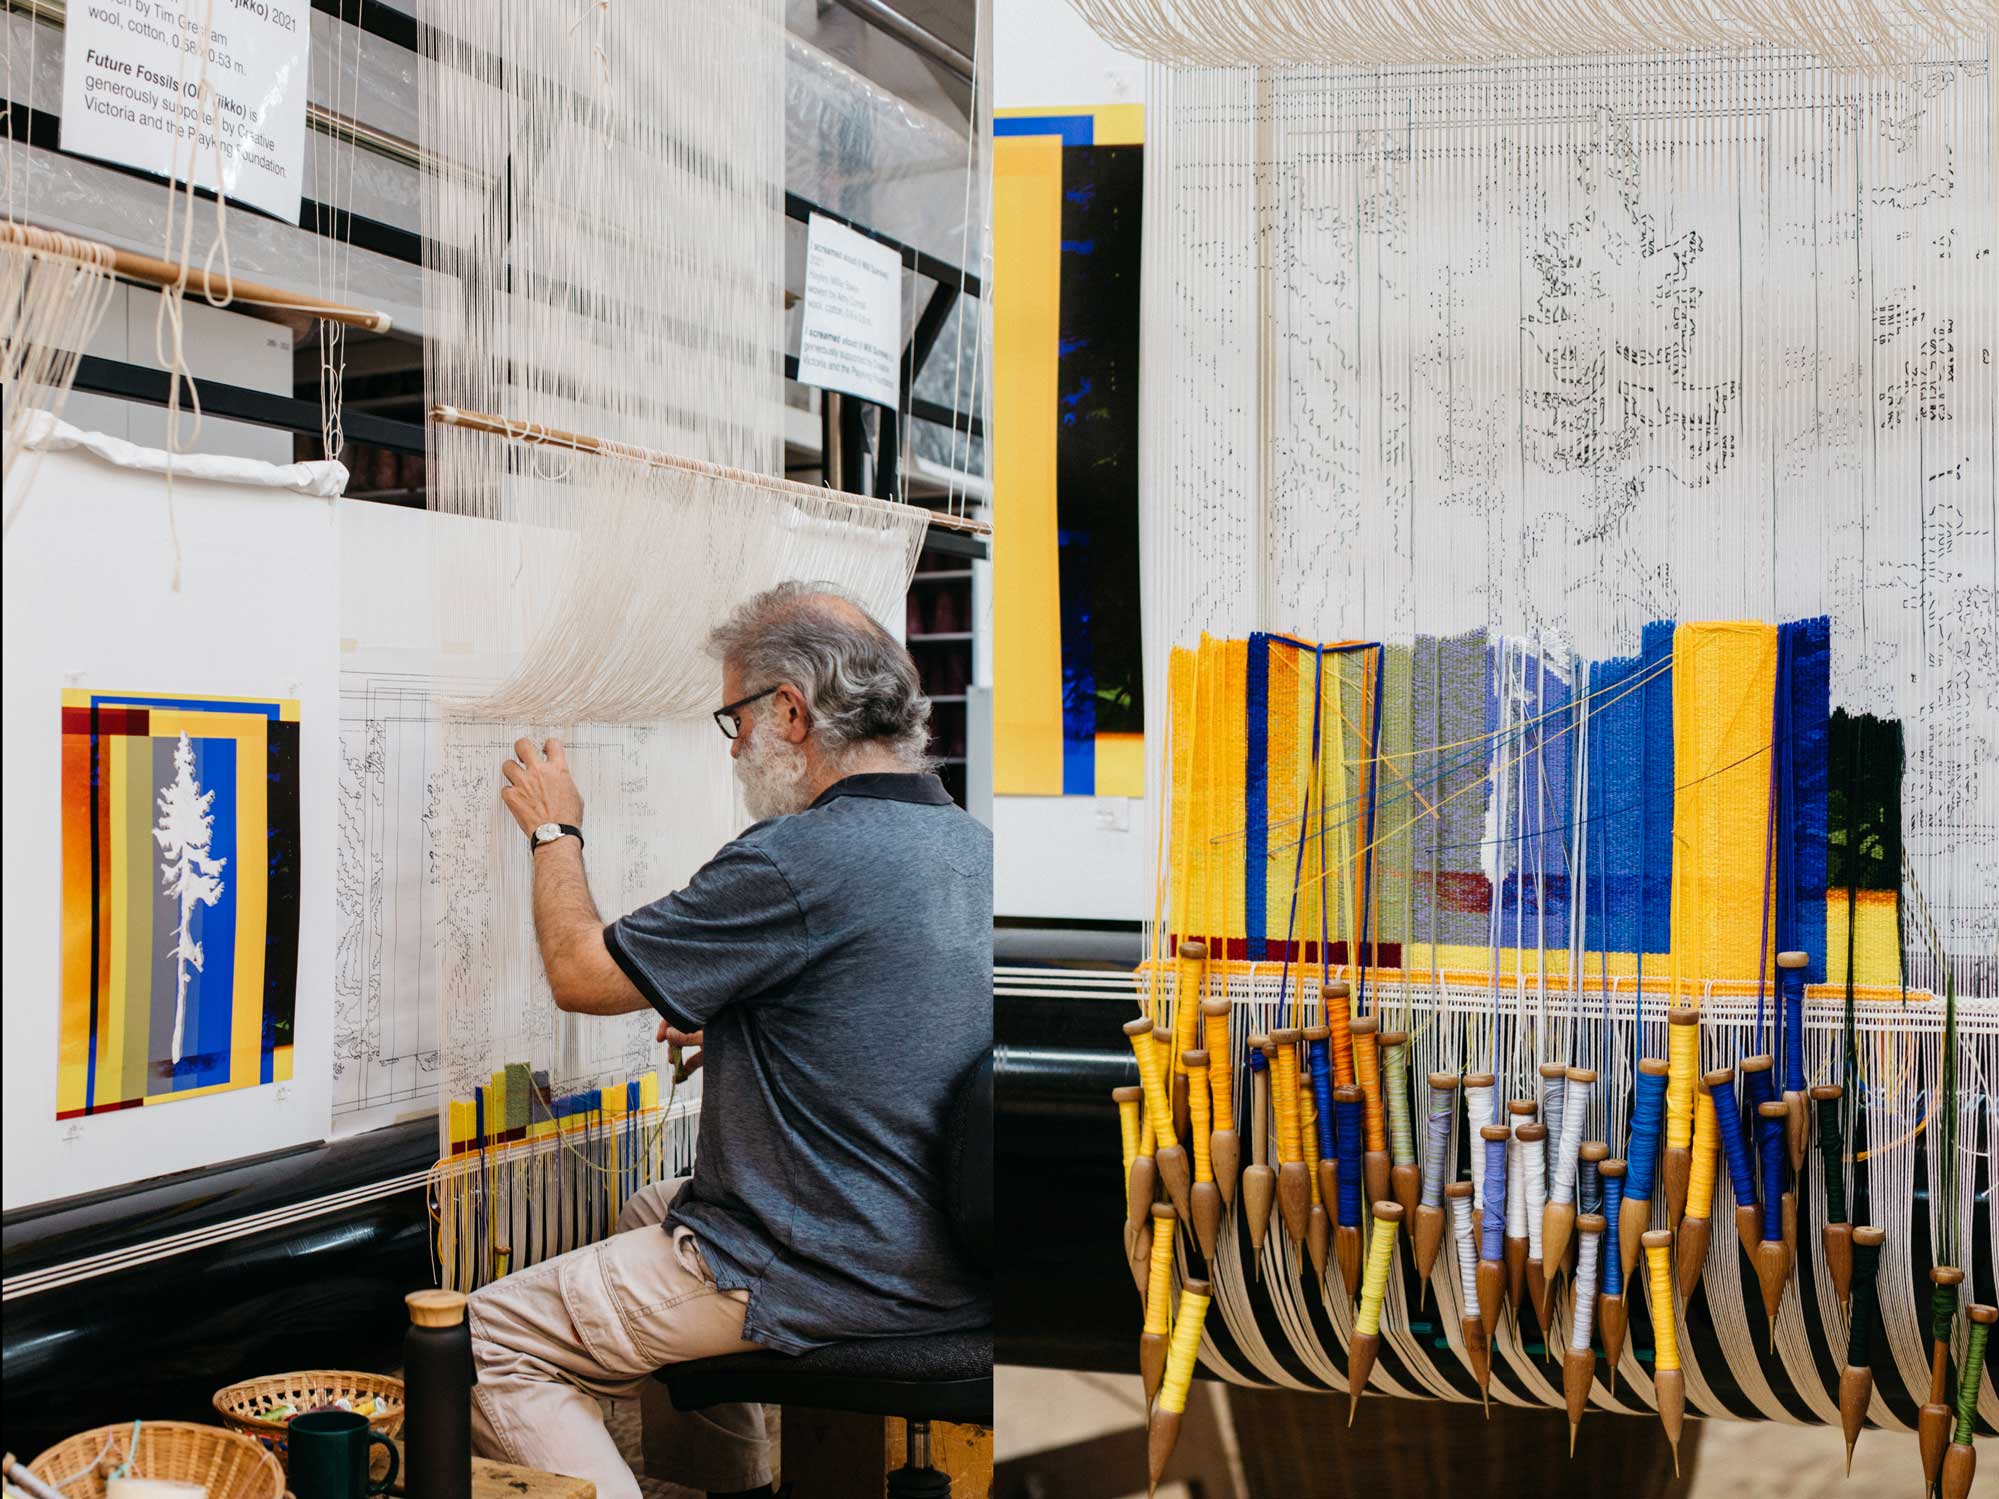 Tapestry in progress: 'Fossil Futures (Old Tjikko)', 2021, designed by Eugenia Lim, woven by Tim Gresham. Images courtesy of Marie-Luise Skibbe.